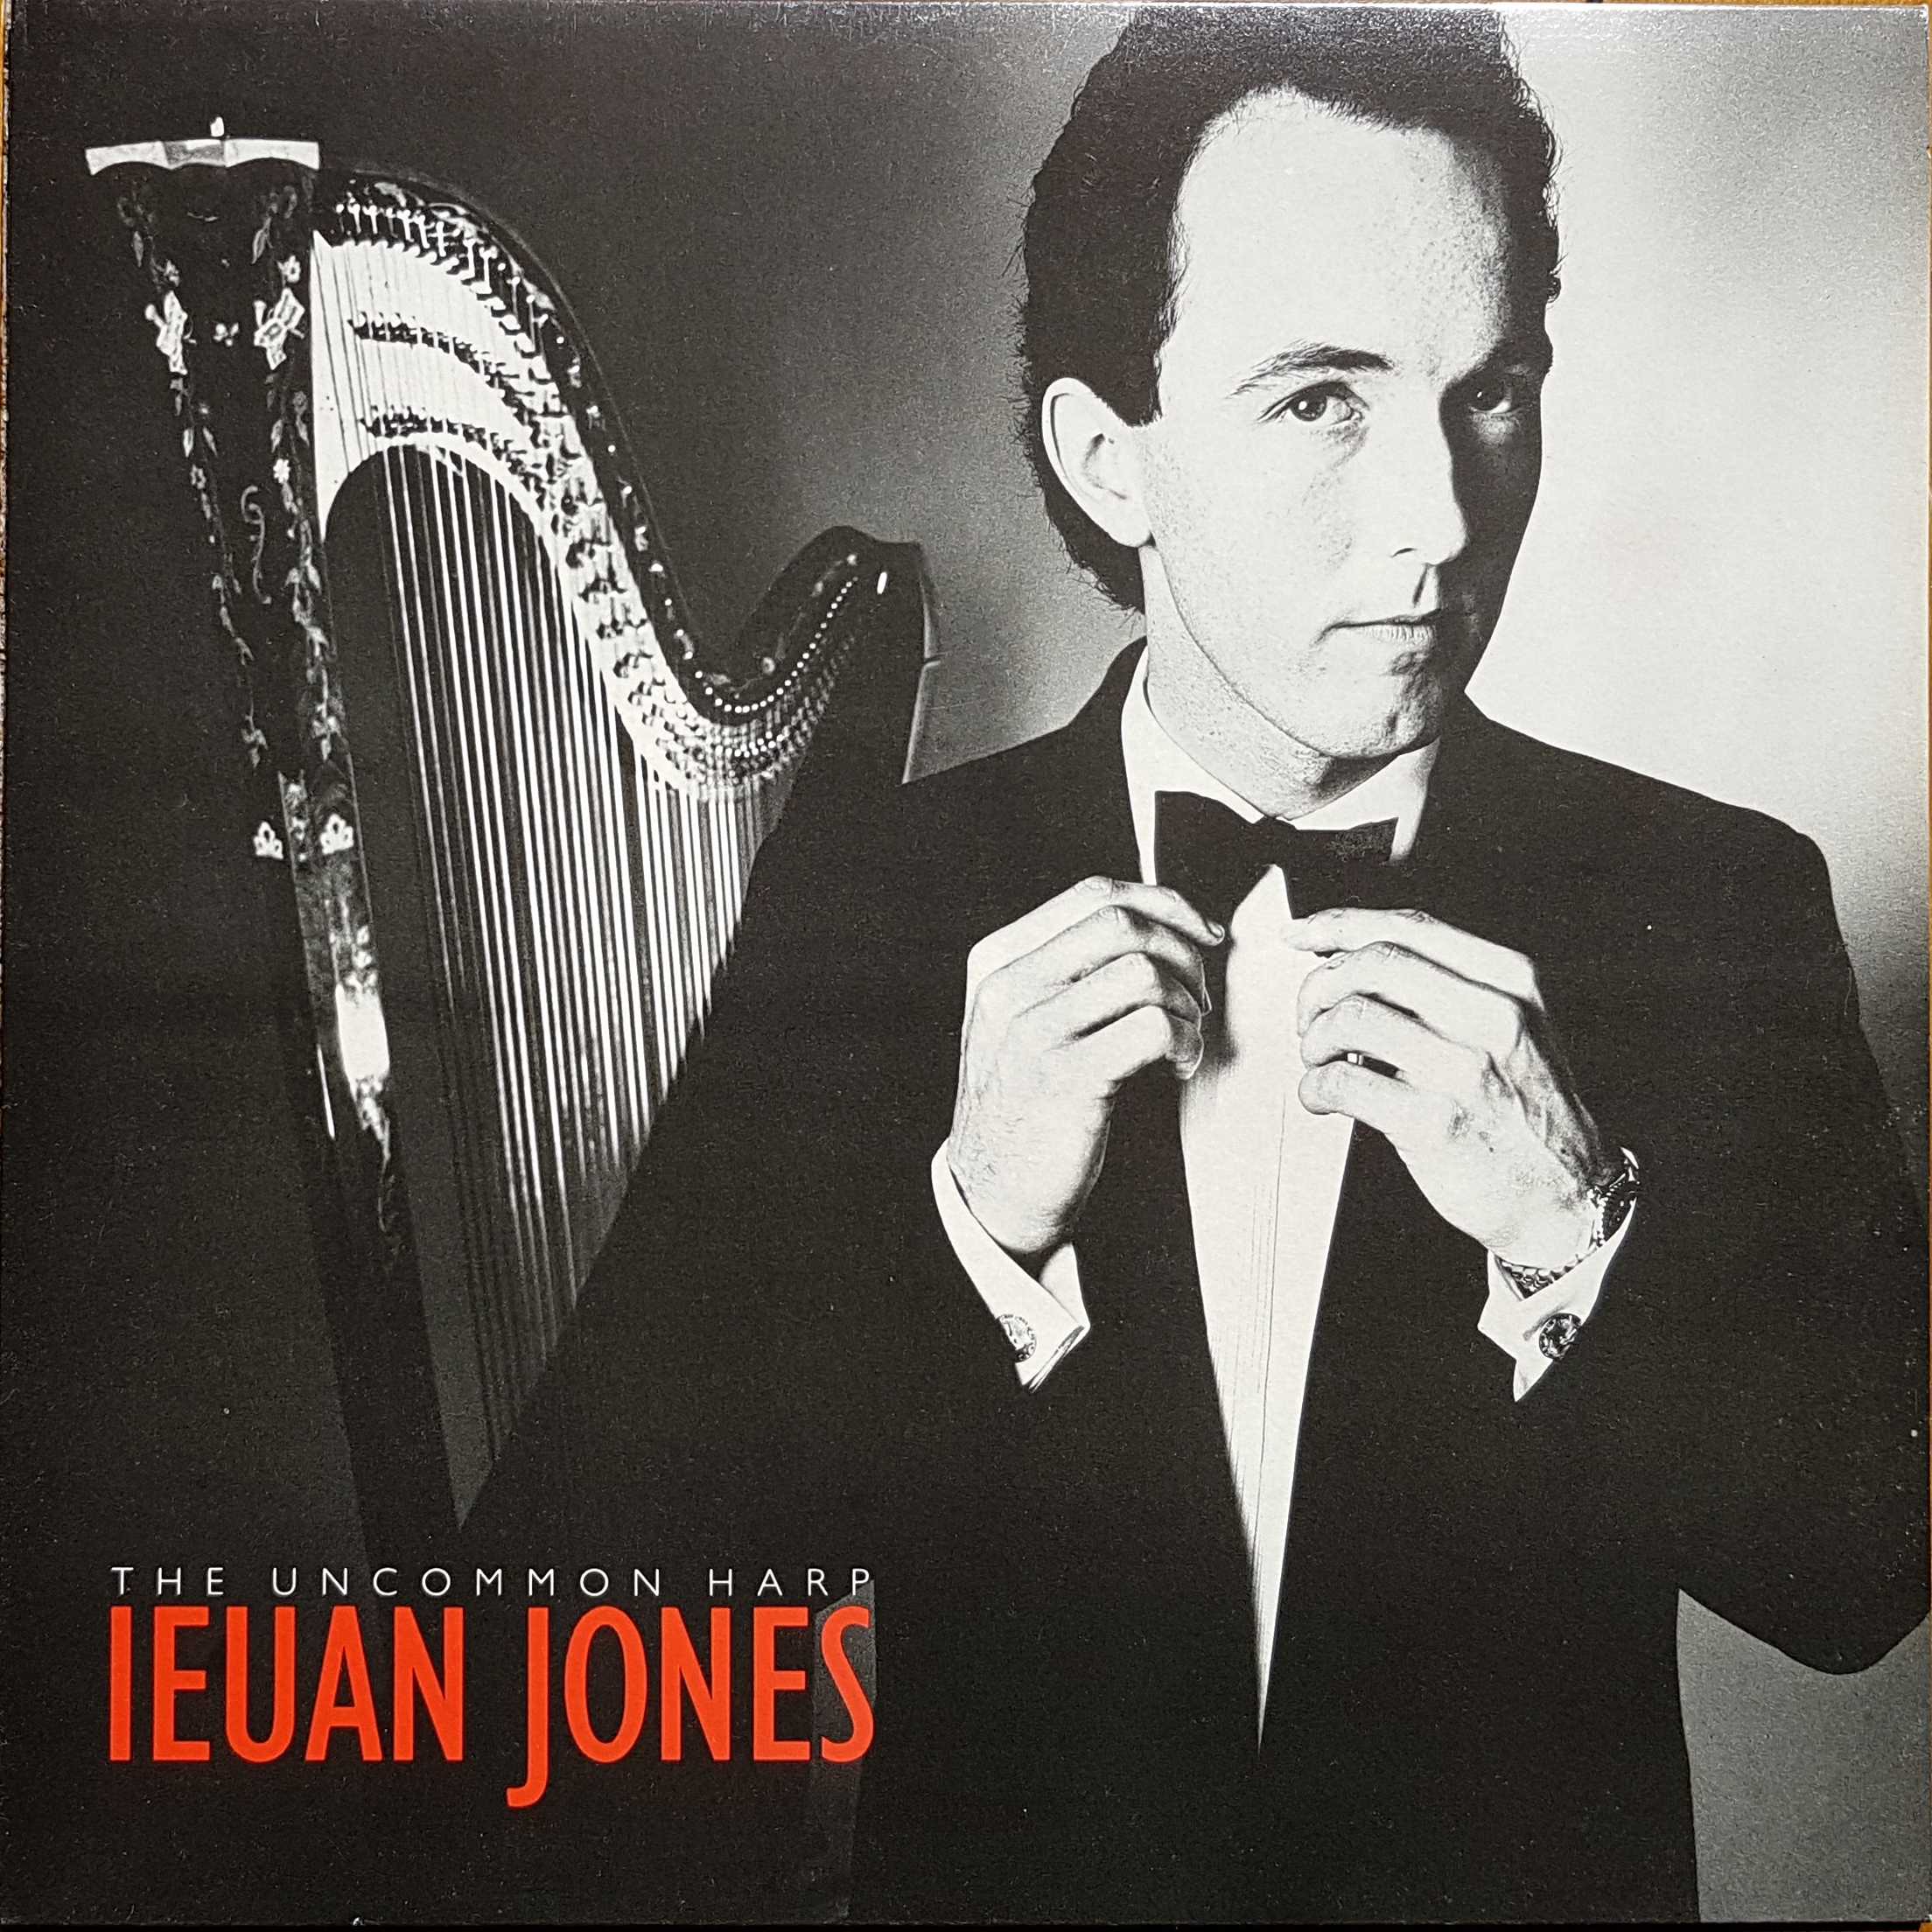 Picture of REN 636 The uncommon harp - Ieuan Jones by artist Ieuan Jones from the BBC albums - Records and Tapes library